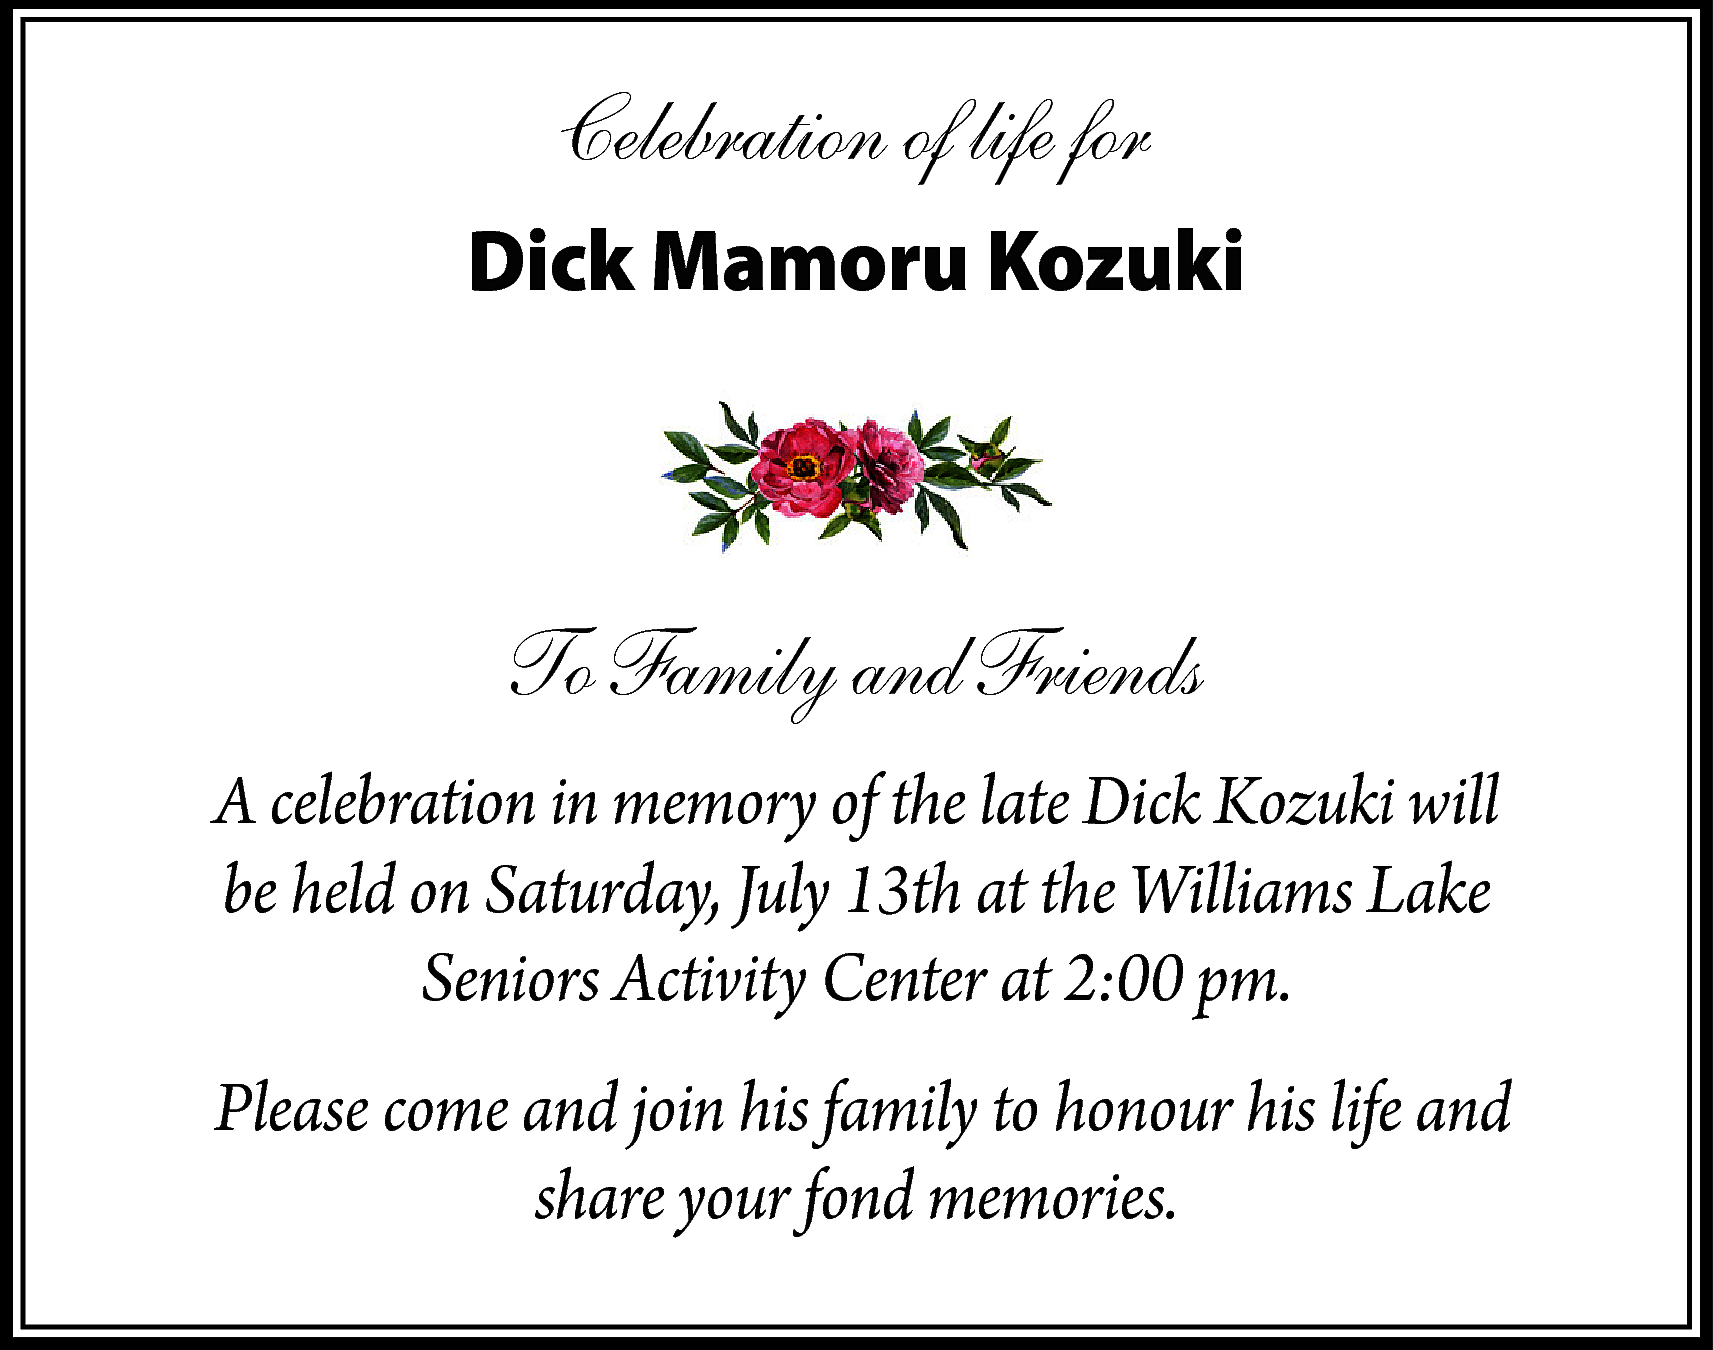 Celebration of life for <br>Dick  Celebration of life for  Dick Mamoru Kozuki    To Family and Friends  A celebration in memory of the late Dick Kozuki will  be held on Saturday, July 13th at the Williams Lake  Seniors Activity Center at 2:00 pm.  Please come and join his family to honour his life and  share your fond memories.    